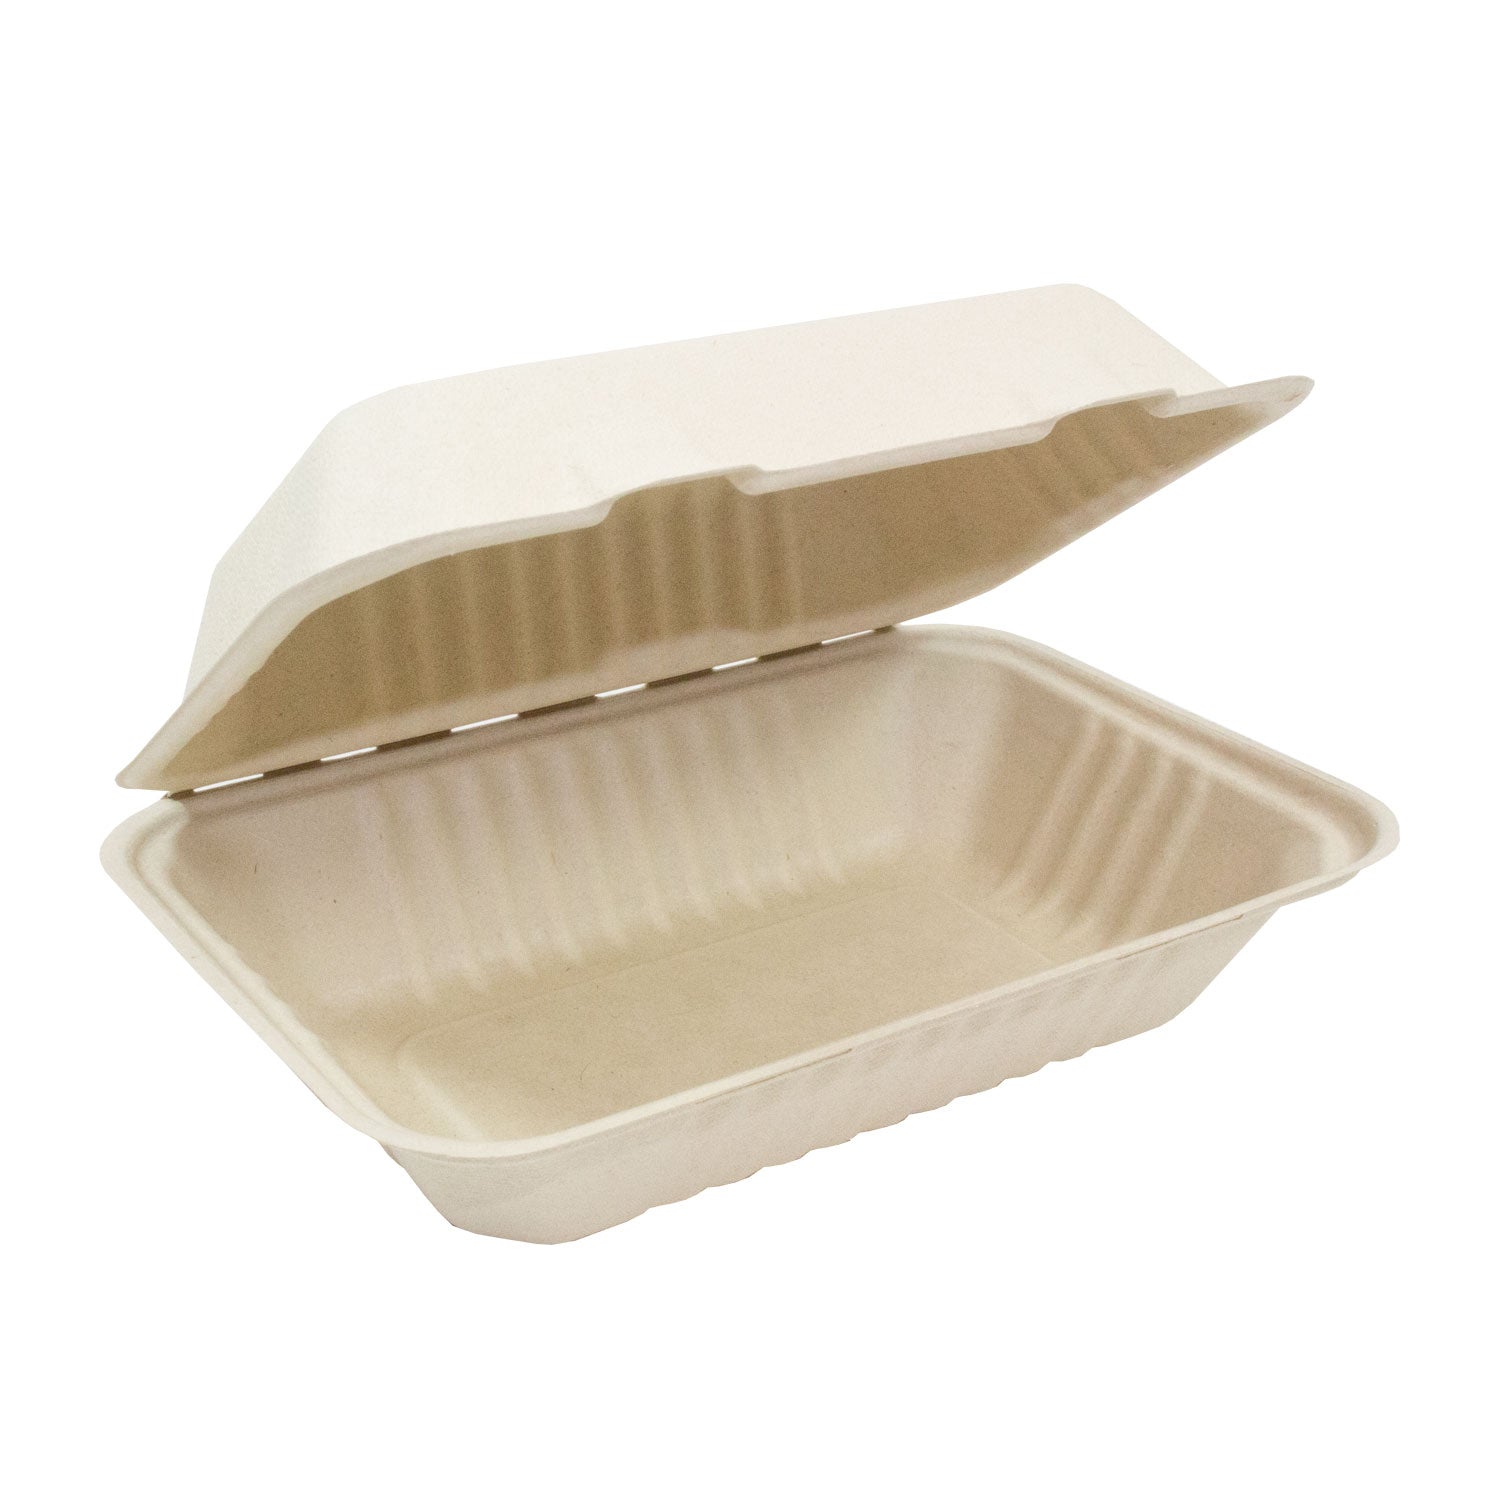 Sysco Reliance Biodegradable Container 9x6 200ct [$0.44/ea]